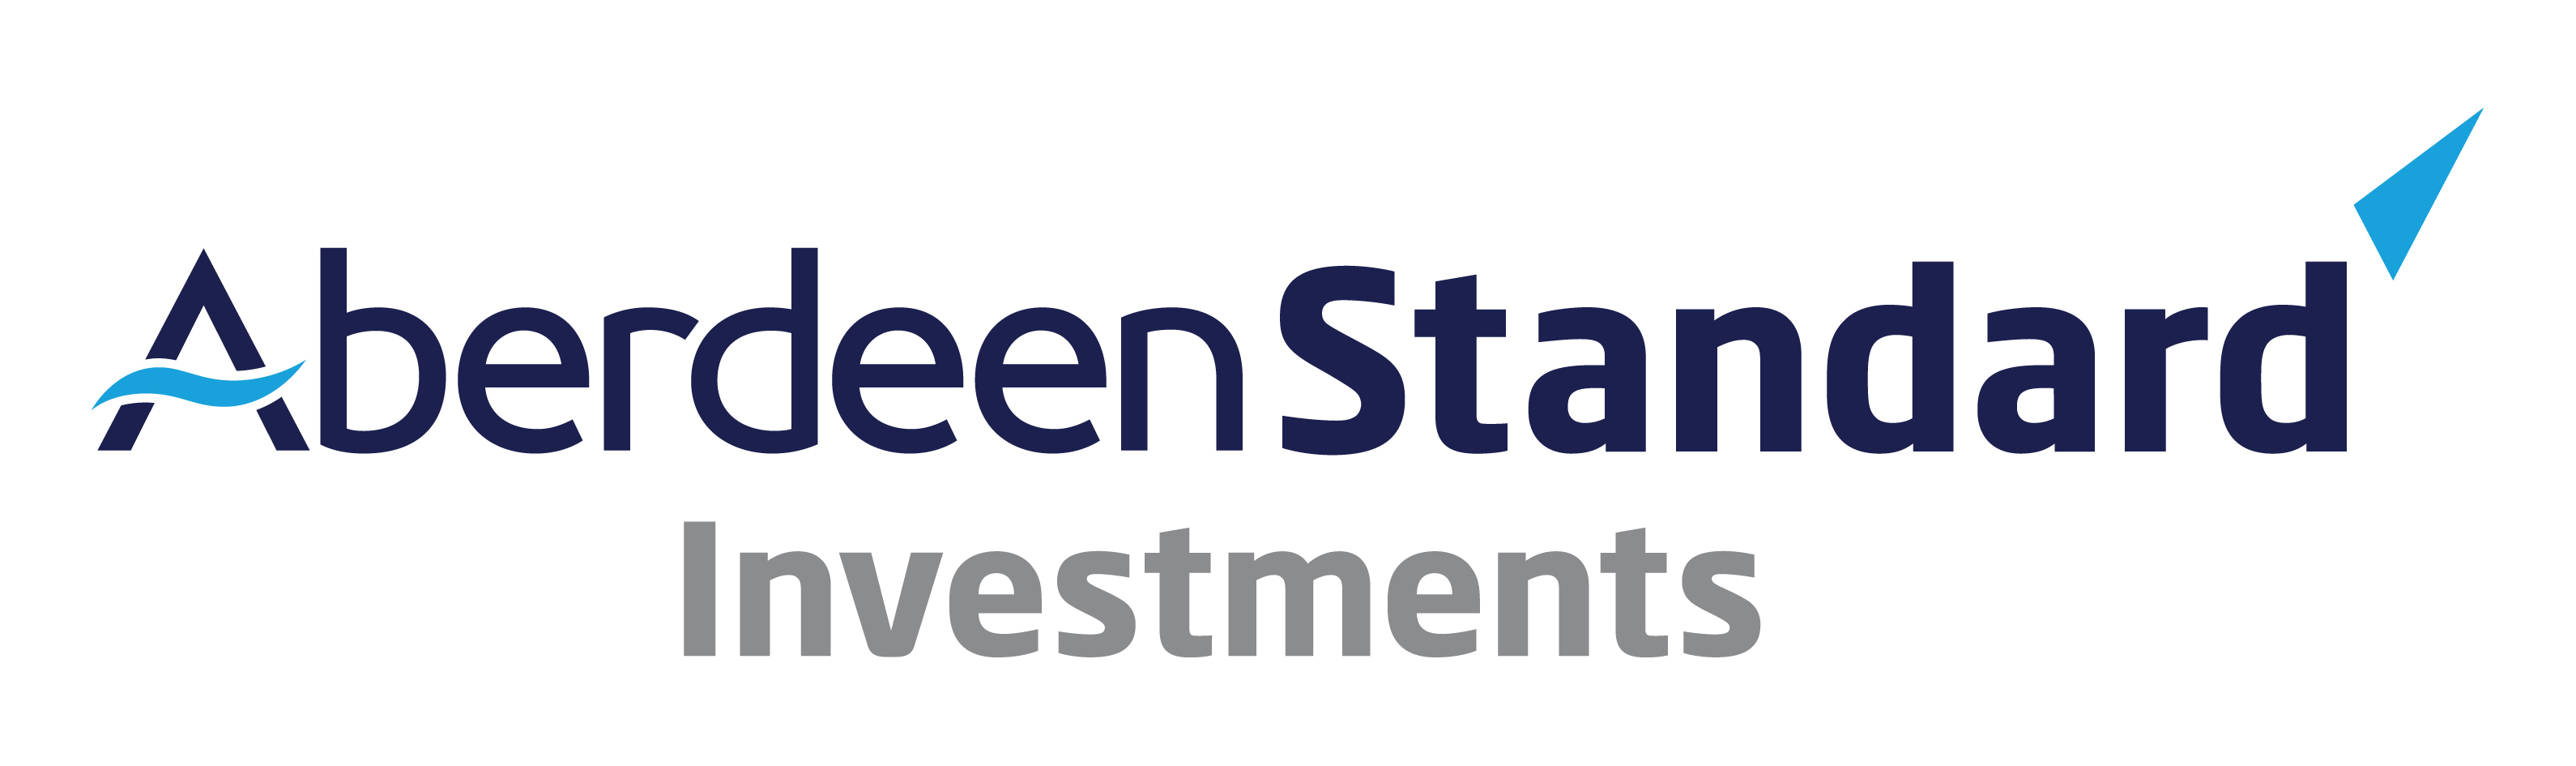 Aberdeen Standard Investments Inc., Wednesday, June 30, 2021, Press release picture